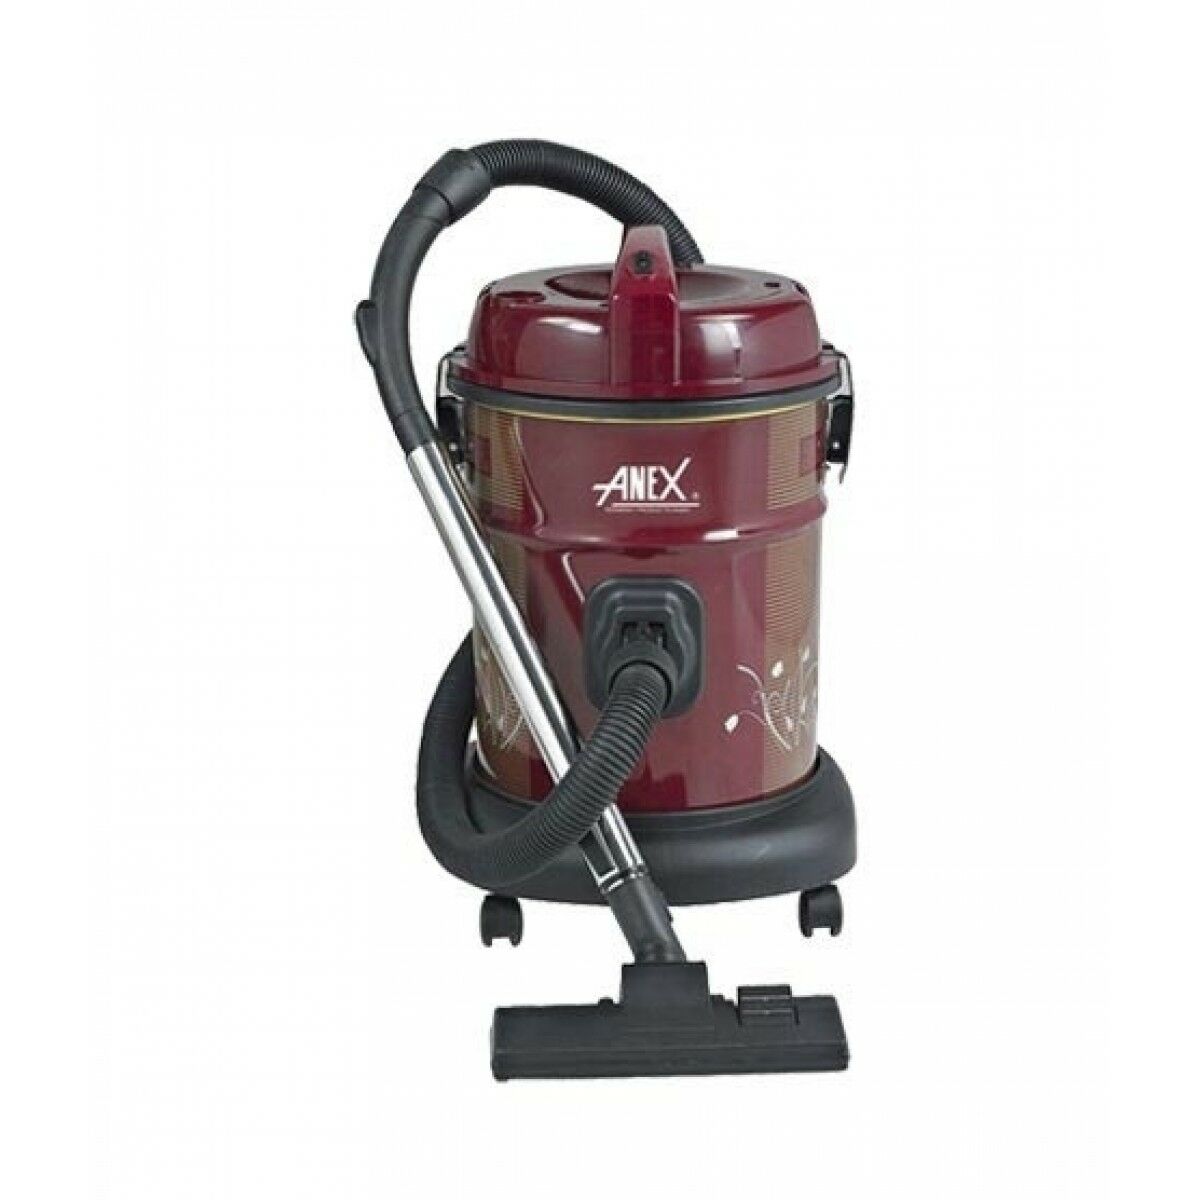 Anex Home Appliances Vacuum Cleaner - AG-2098